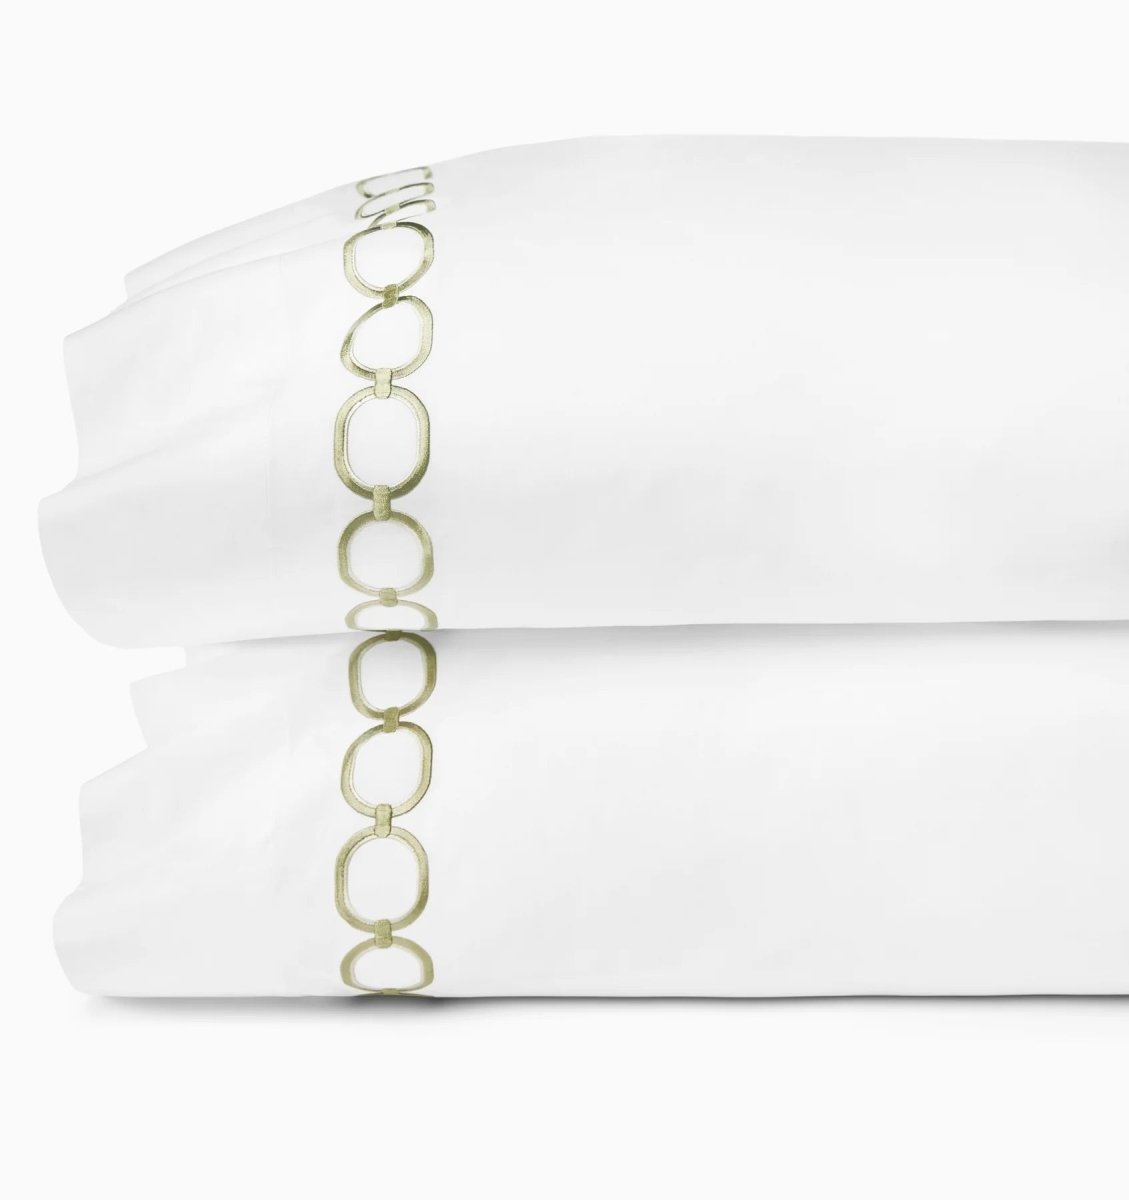 Pillowcases - Sferra Linens Catena Willow Green Percale Bedding at Fig Linens and Home